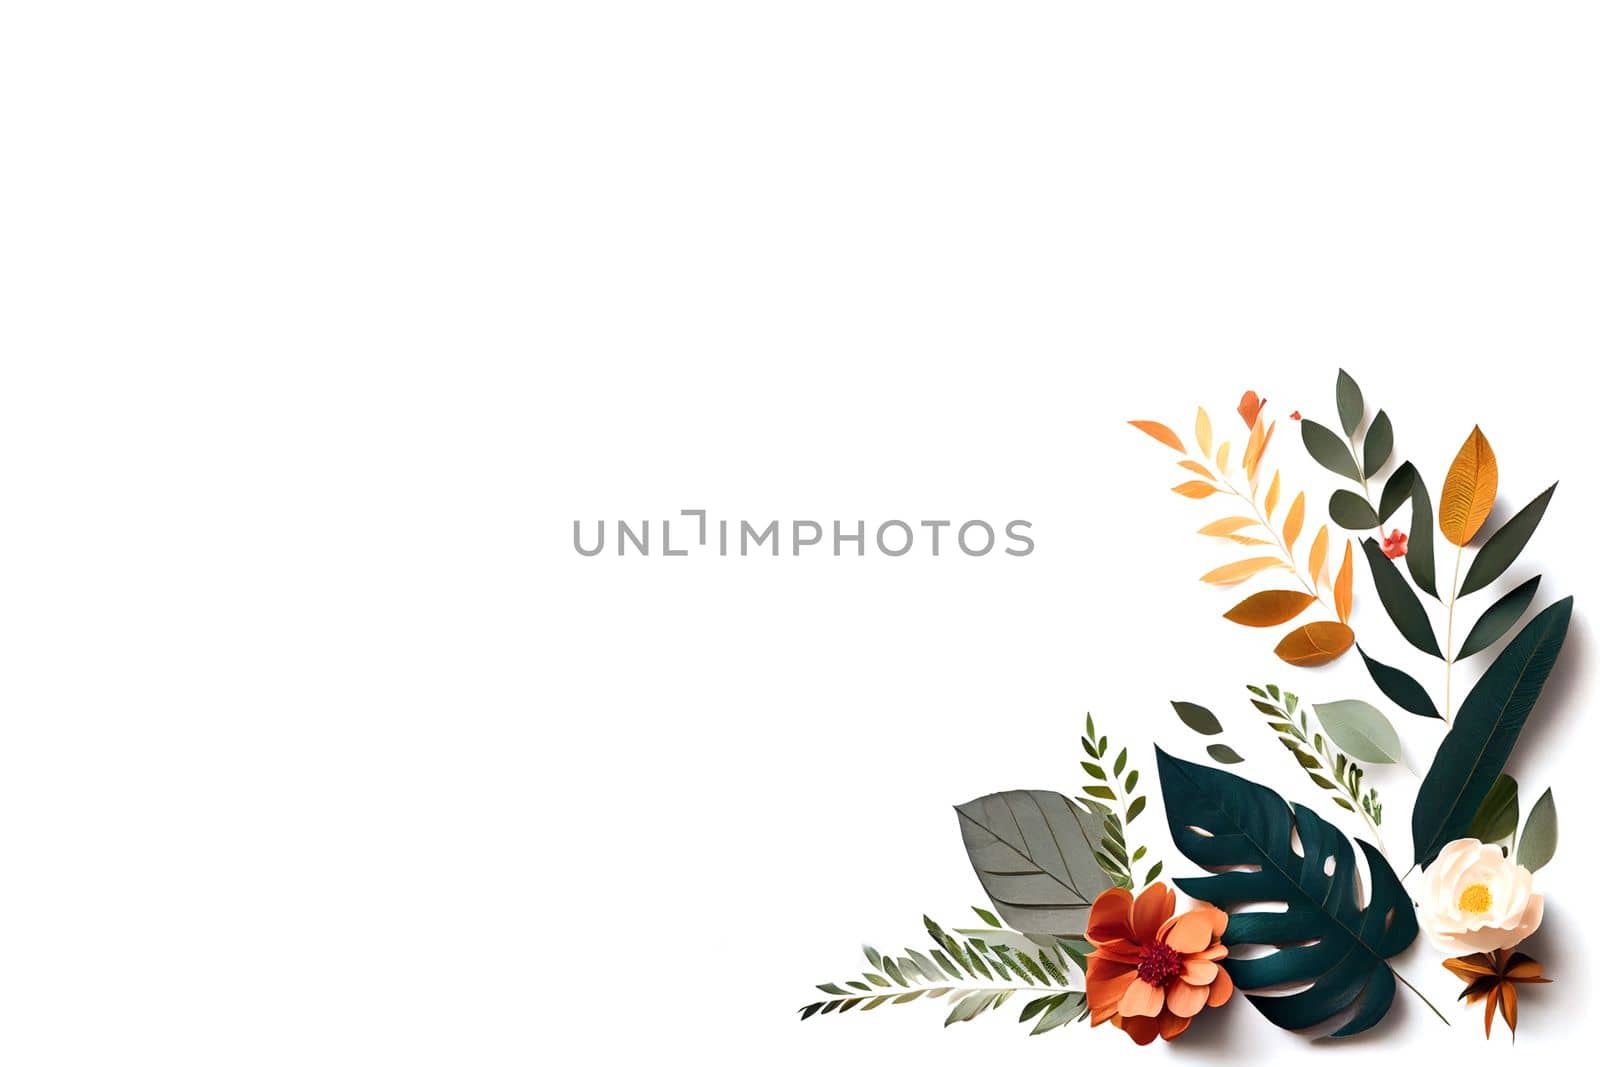 Composition of flowers. Frame pattern made from different dried flowers and leaves on white background. Flat lay, top view, copy space